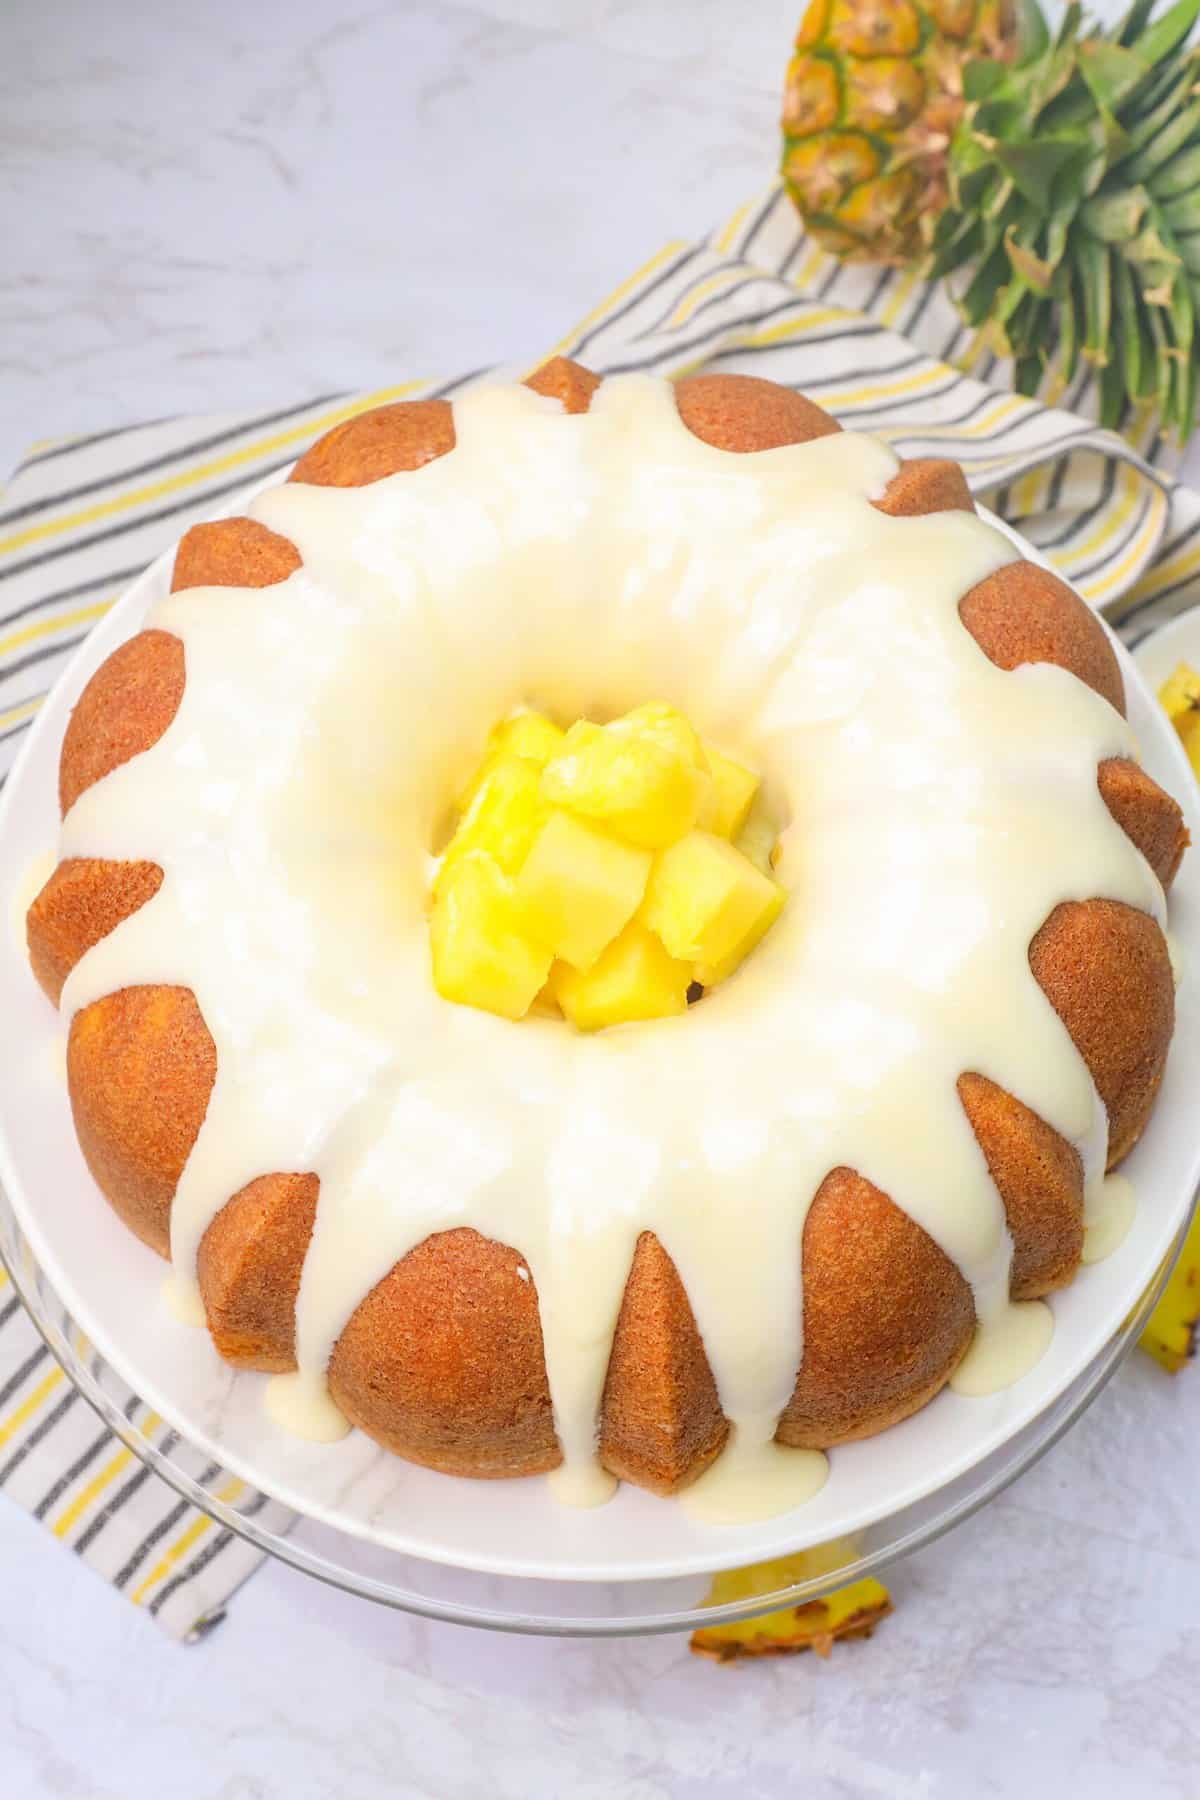 Pineapple Bundt Cake  NO Cake Mix! - This Delicious House